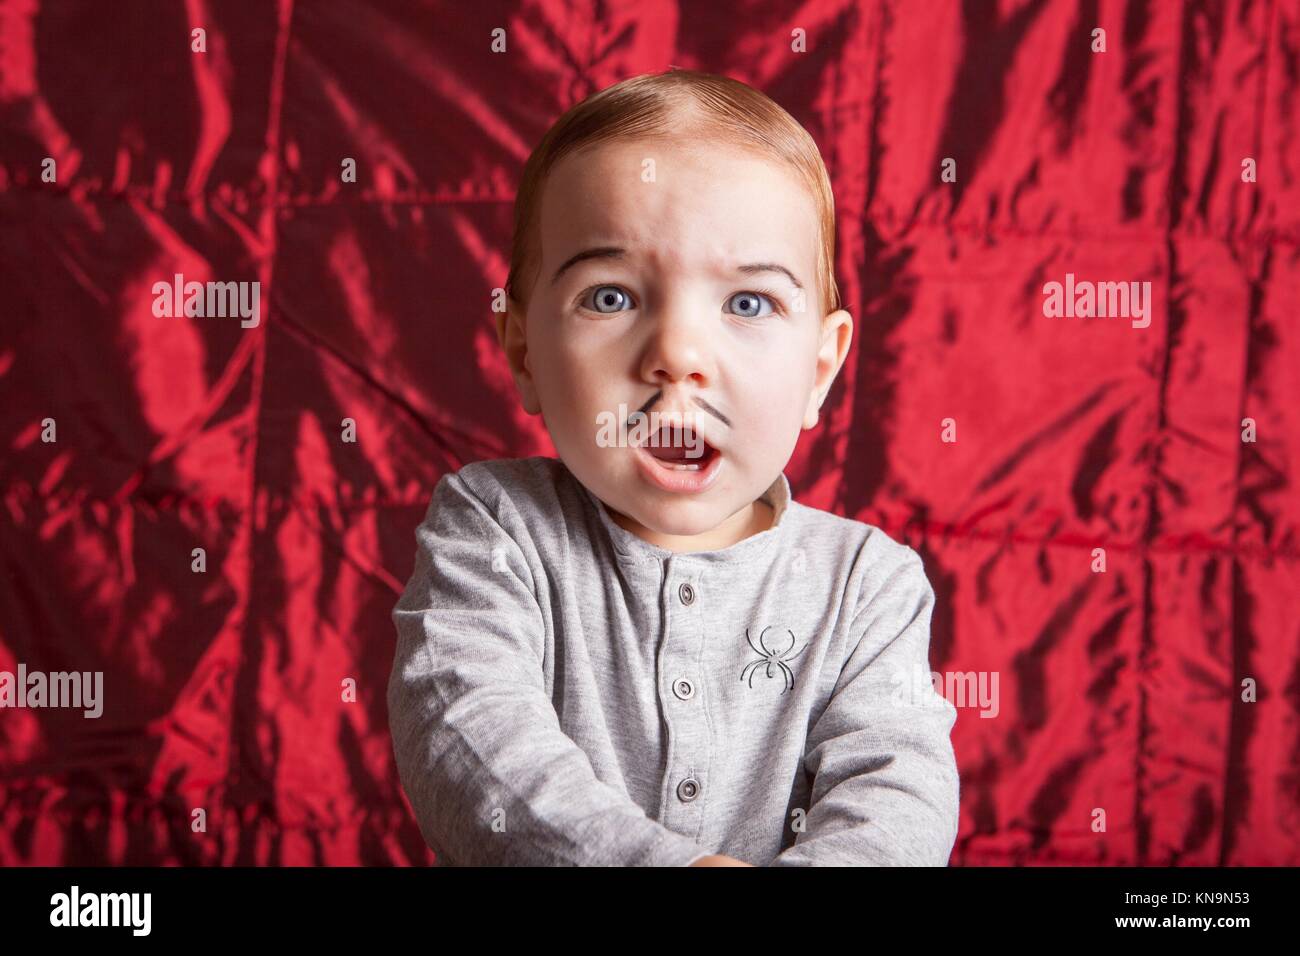 Portrait of a little boy dress up for halloween party. He has a surprised expression. Stock Photo